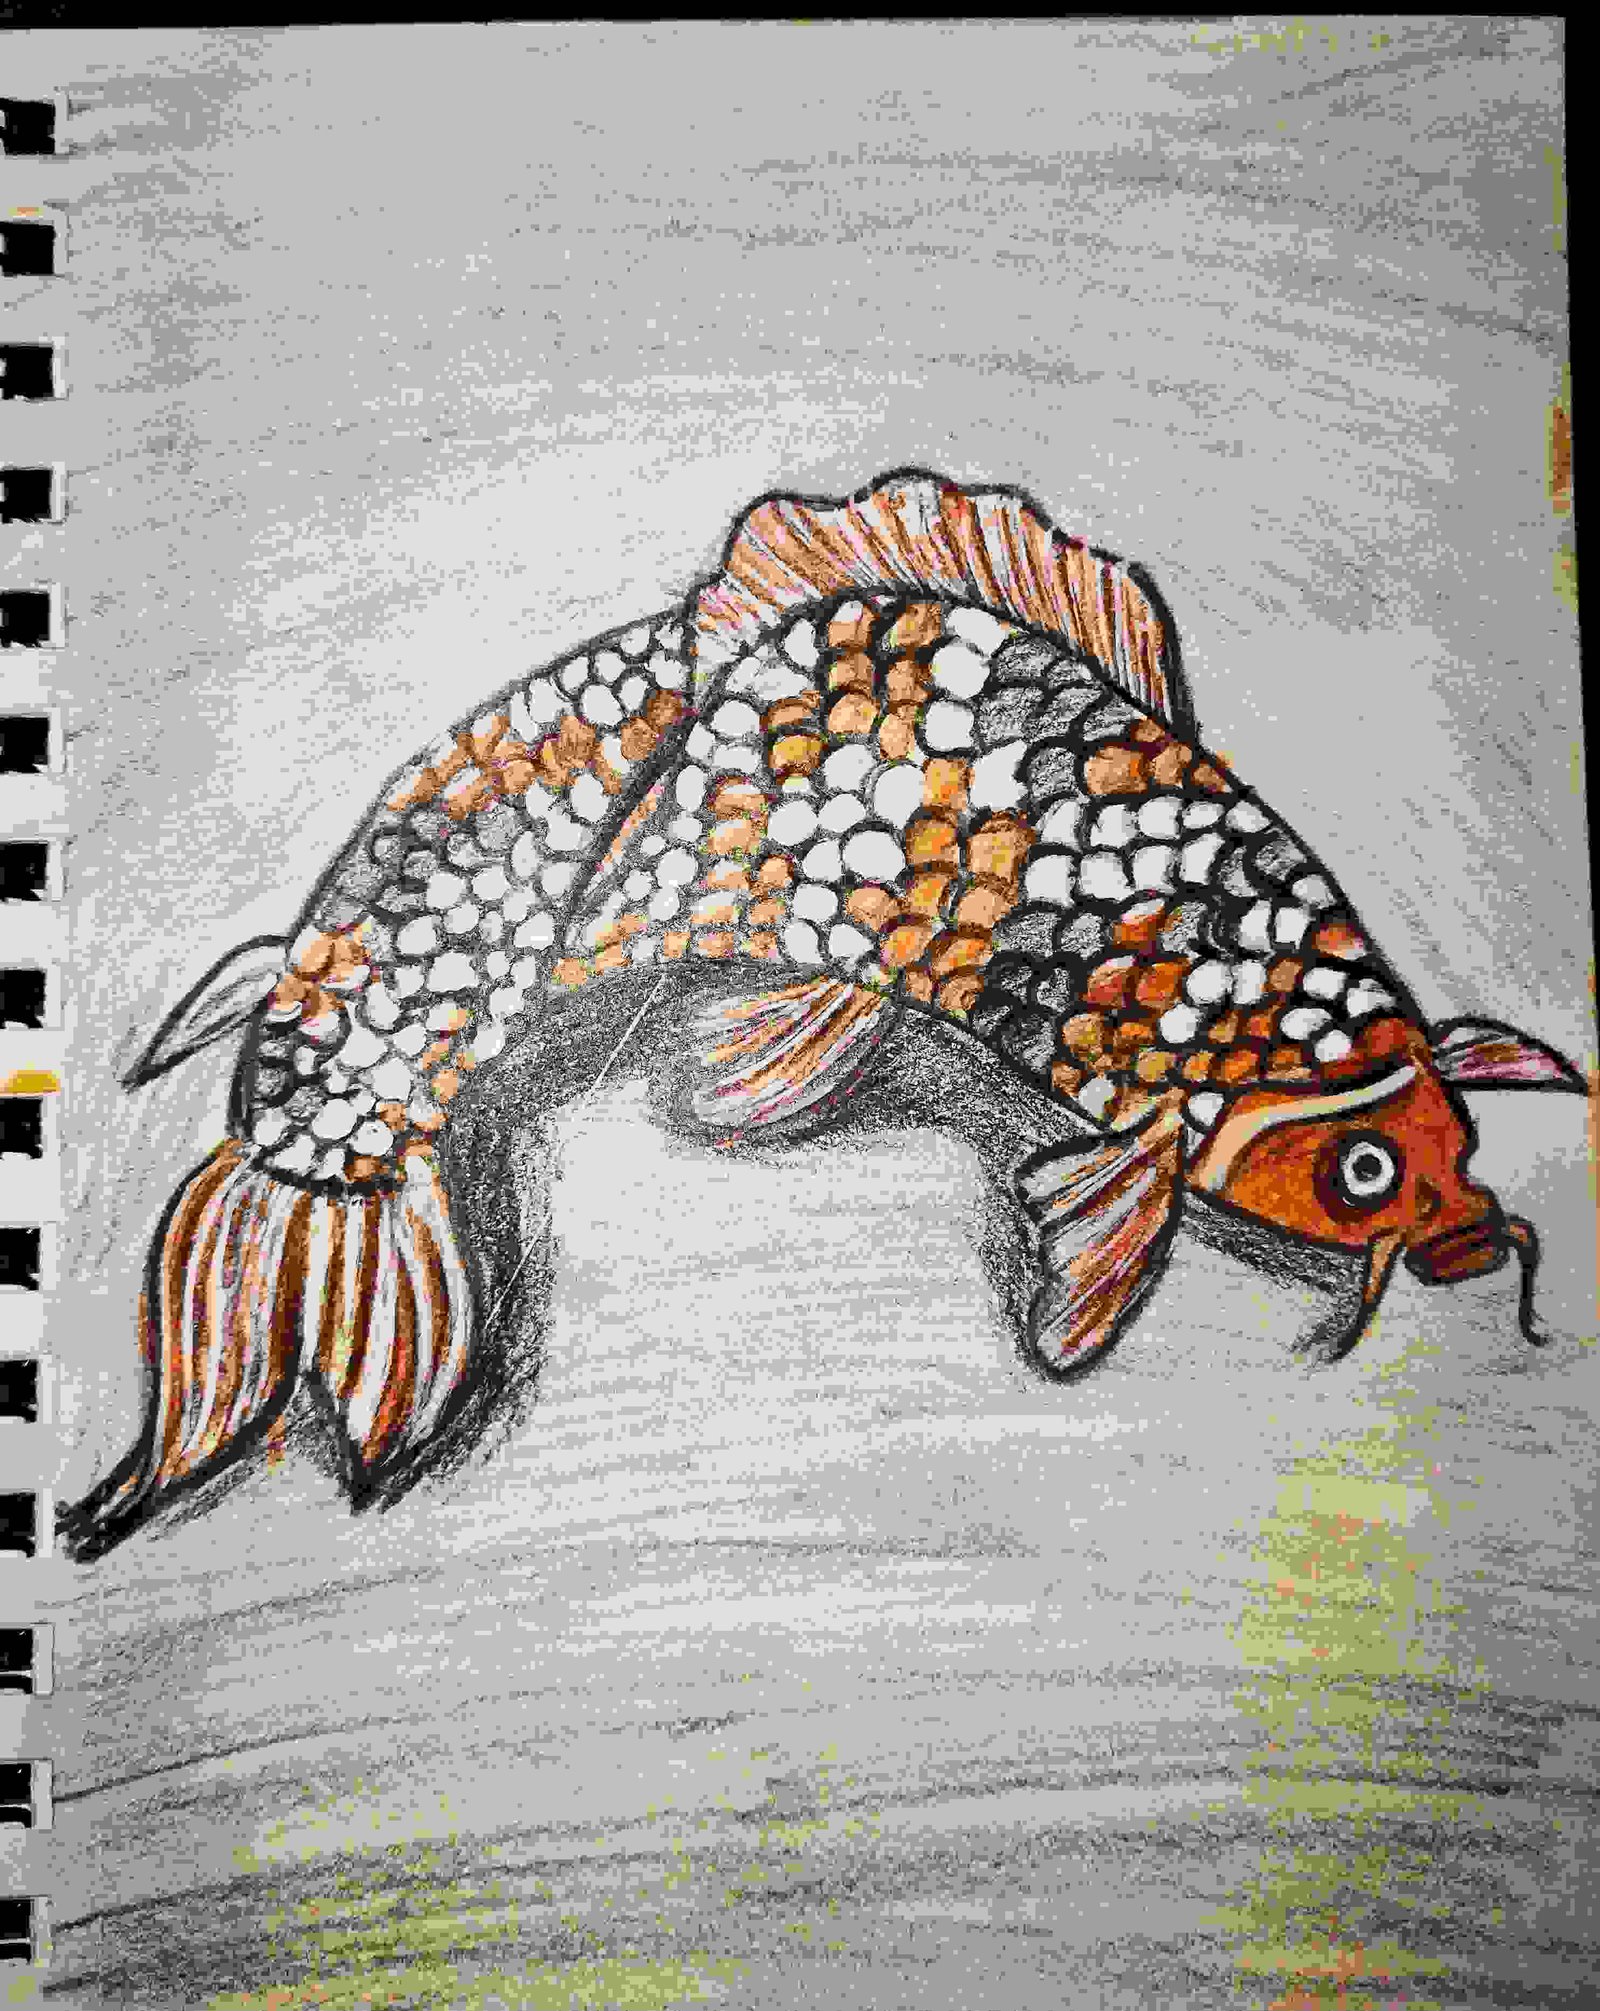 Painting Of Koi Fish Drawing In Colour Pencils - GranNino